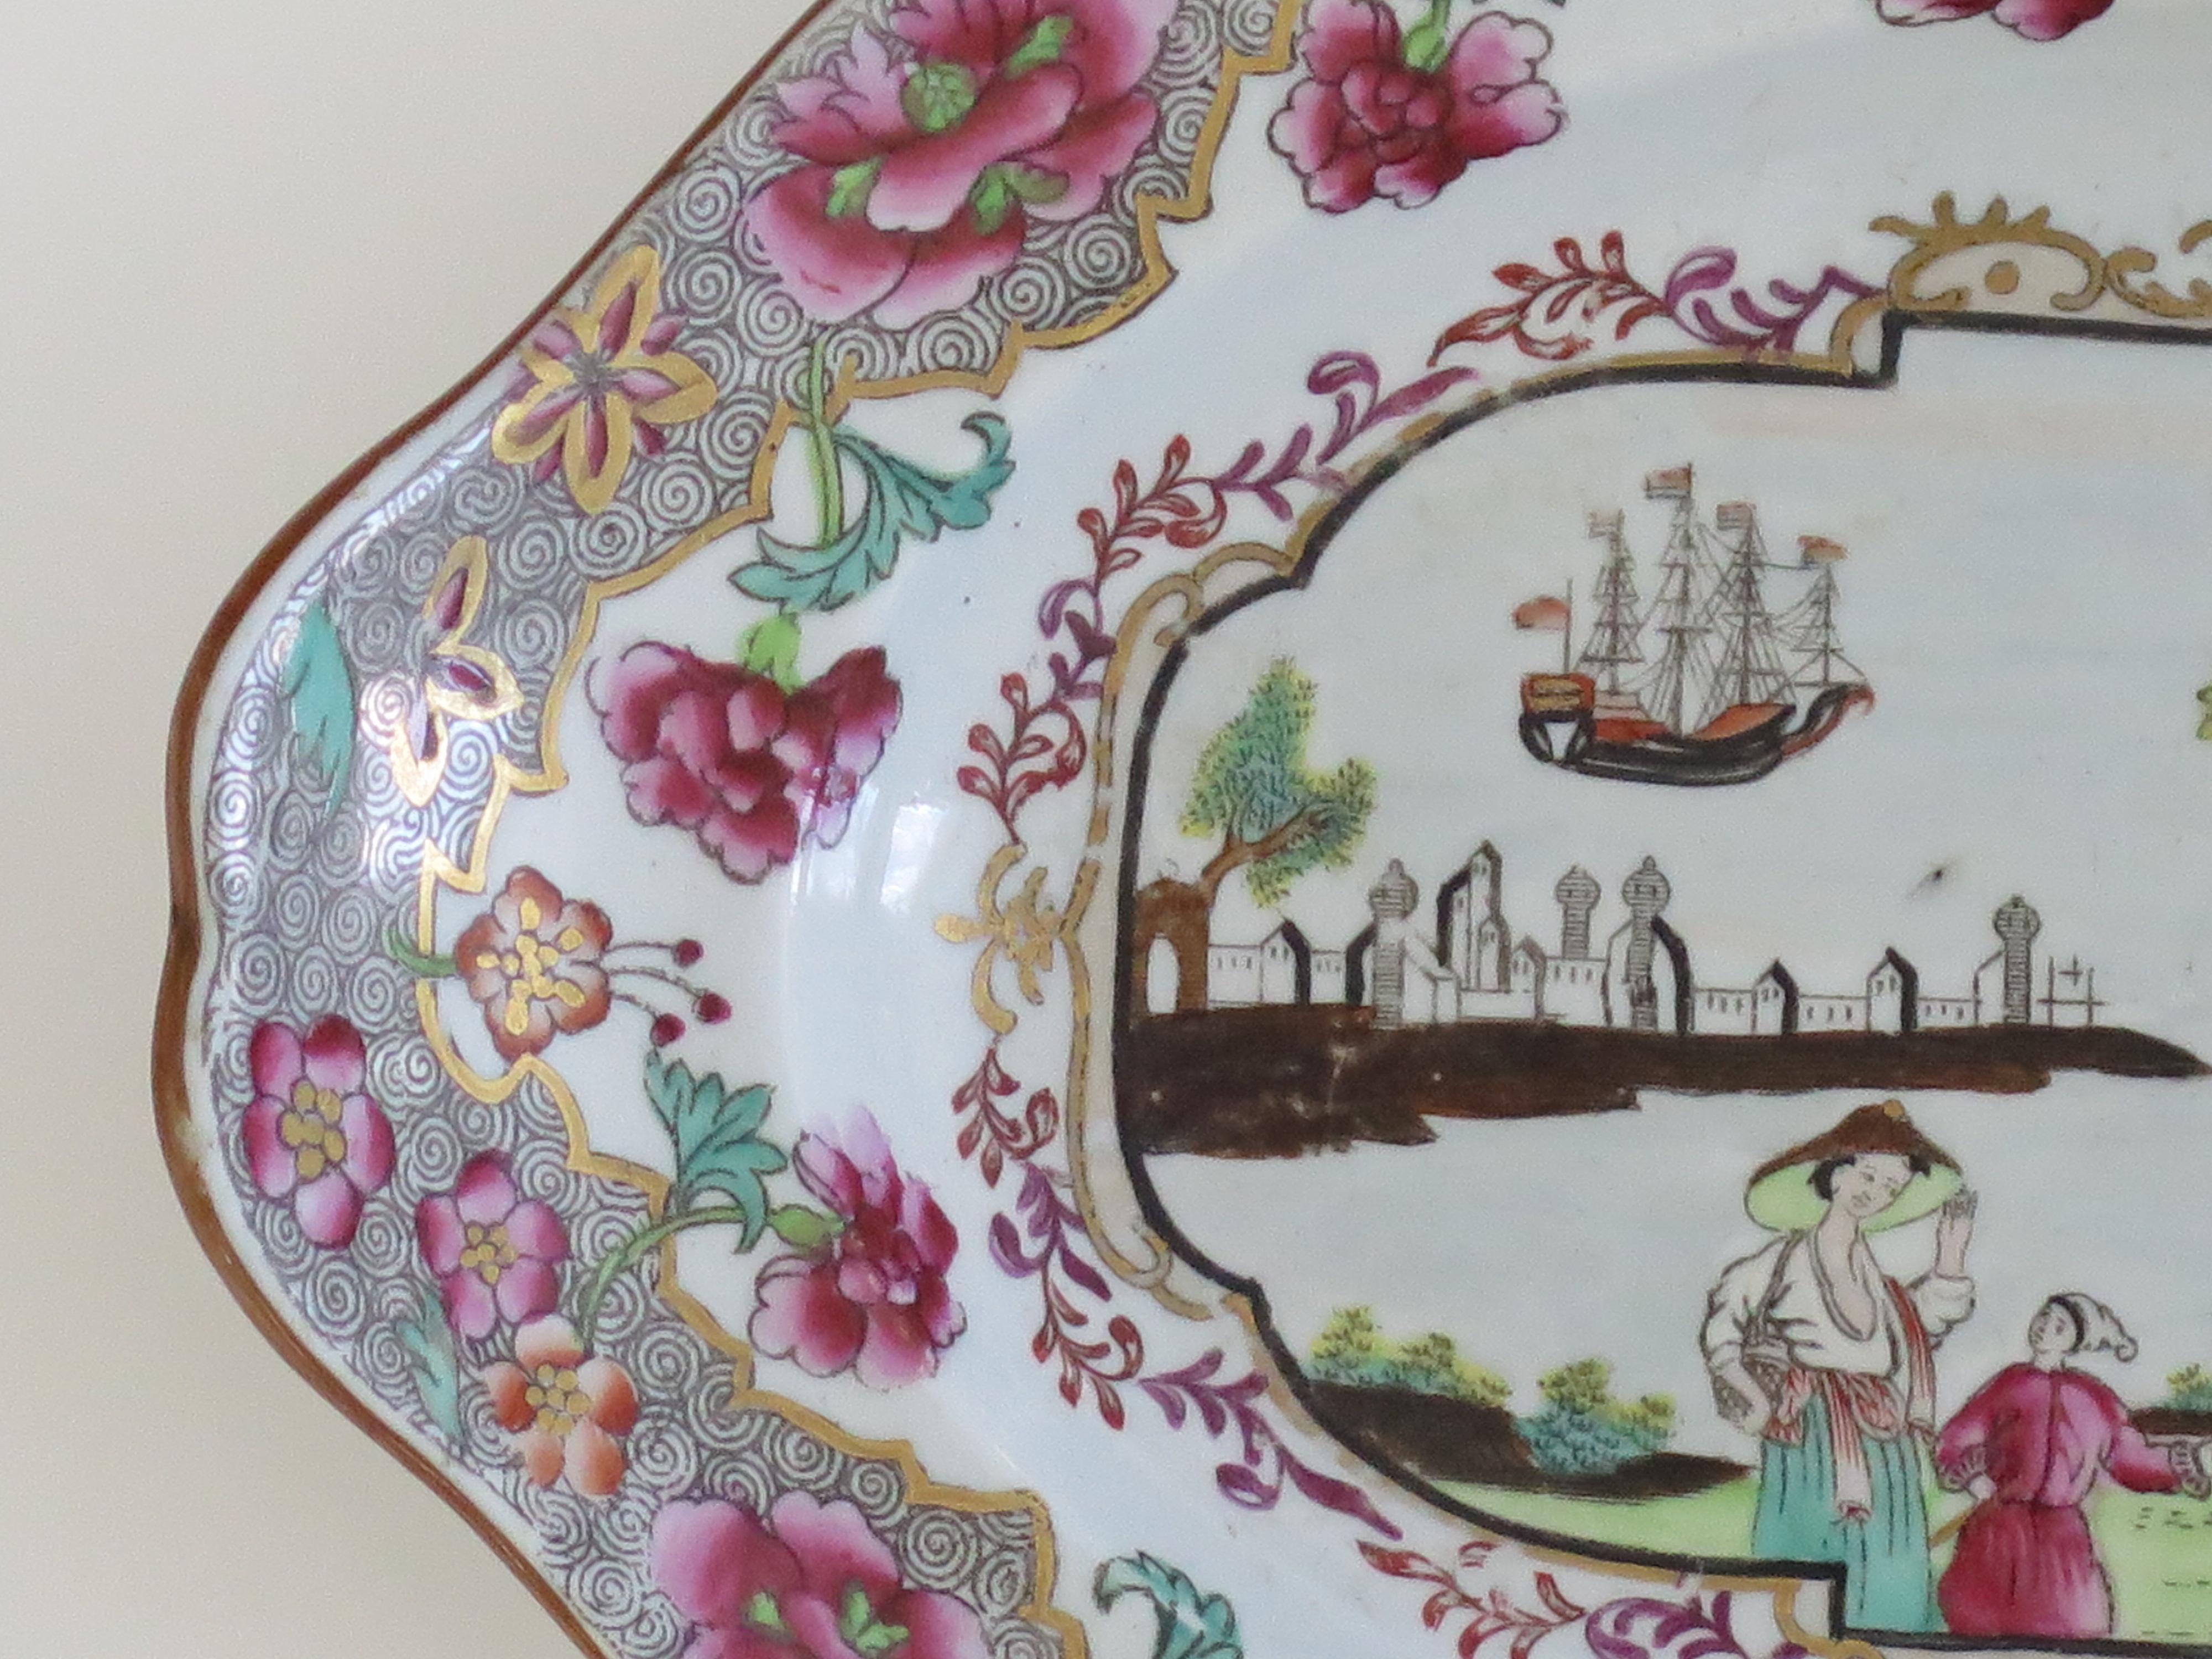 Hand-Painted Spode Stone China Small Serving Dish in Ship Pattern 3068, circa 1810 For Sale